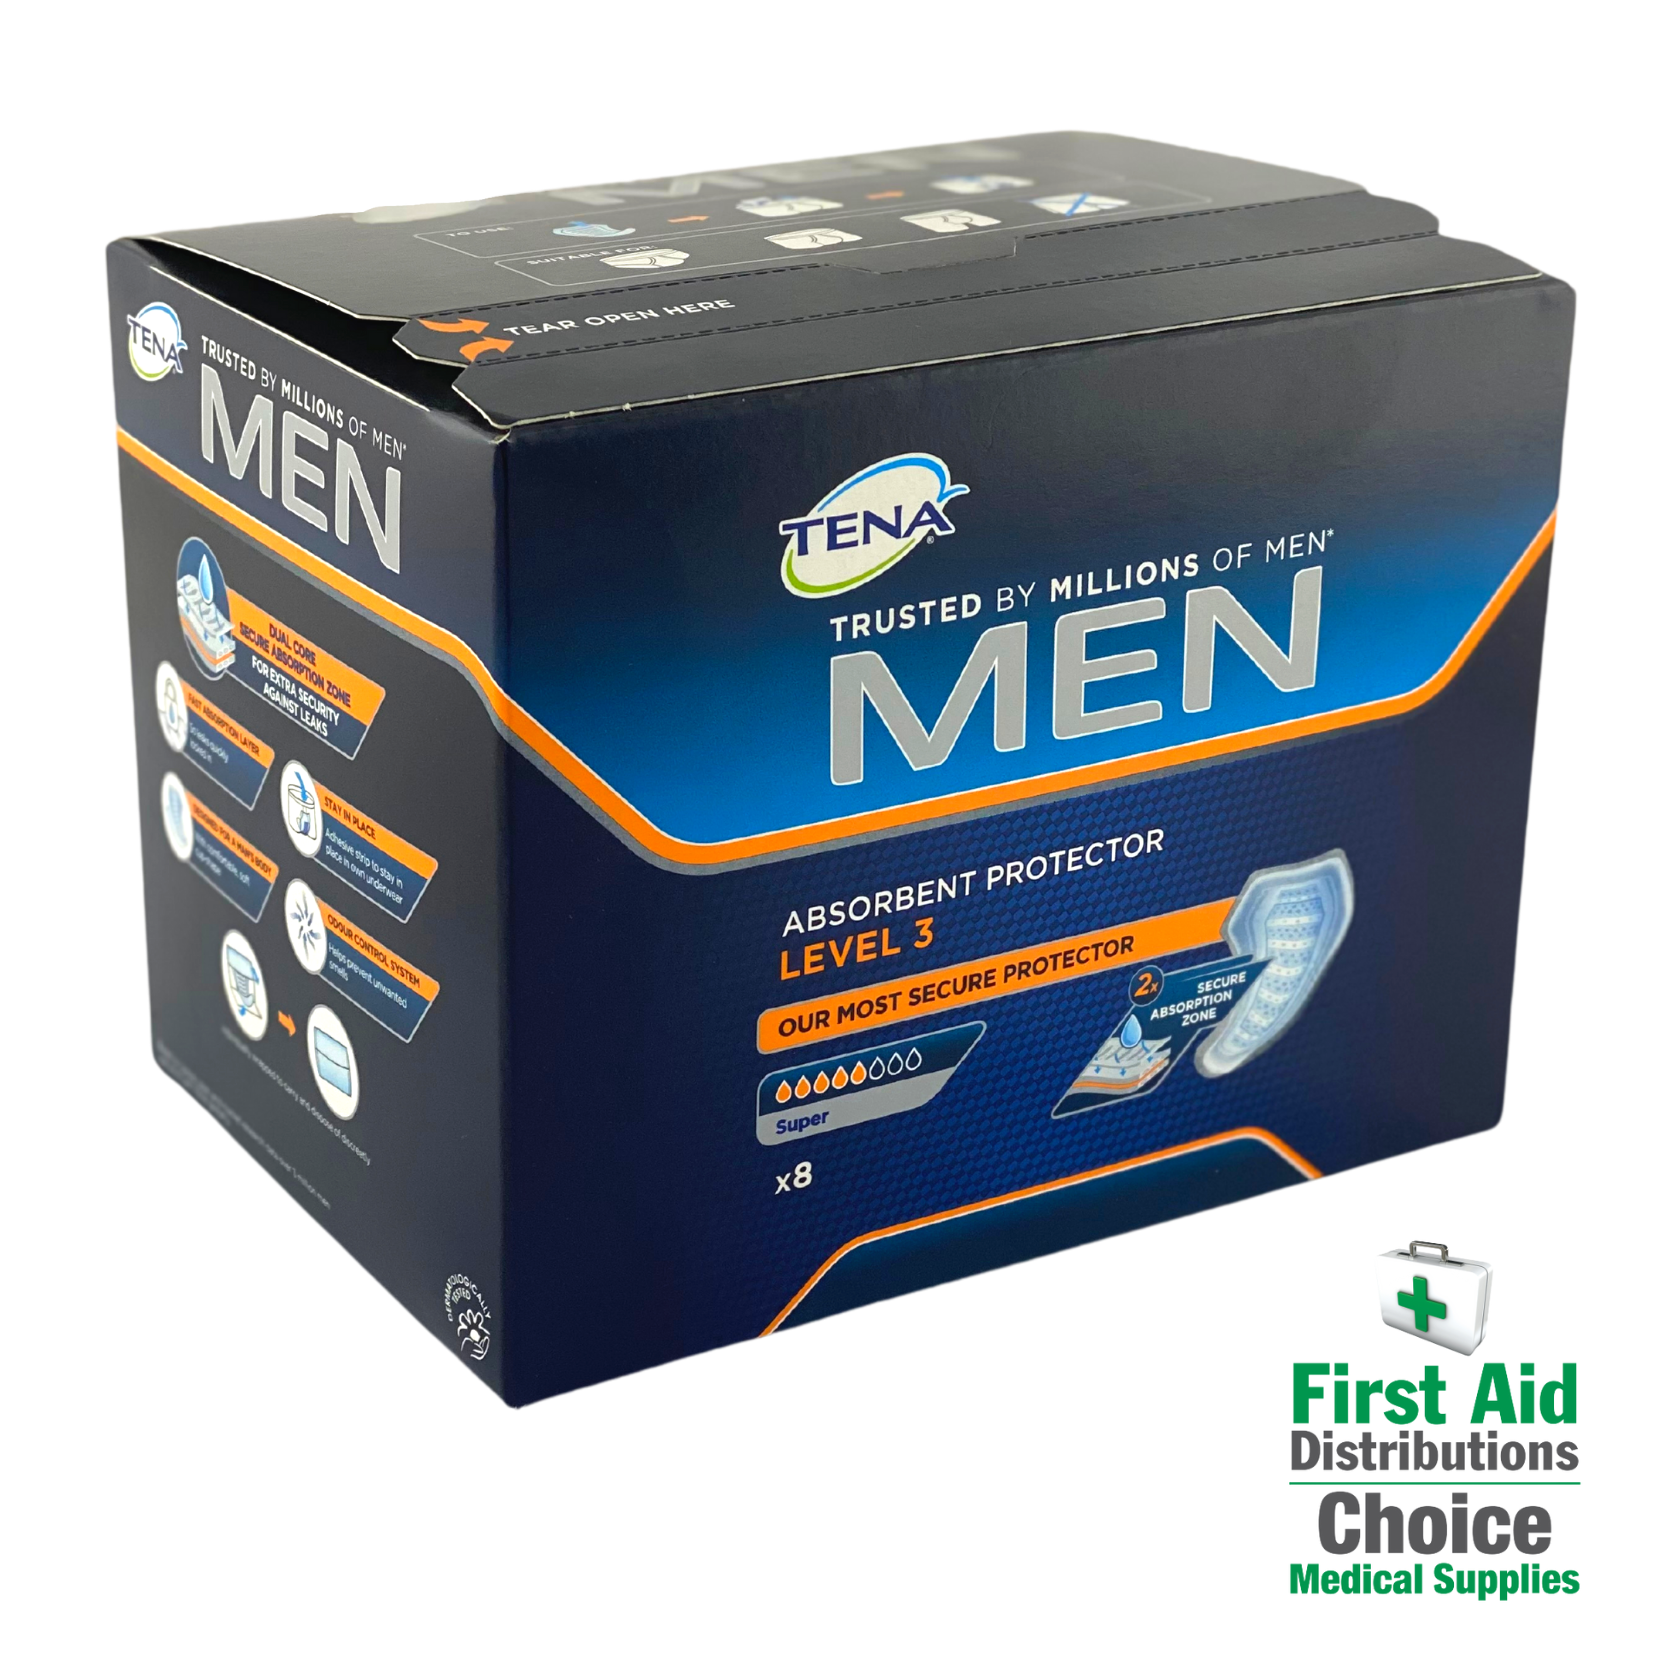 collections/Tena_Men_Absorbent_Protector_Level_3_First_Aid_Distributions_bd2a5928-55a9-4577-8d87-a5dded8b308c.png